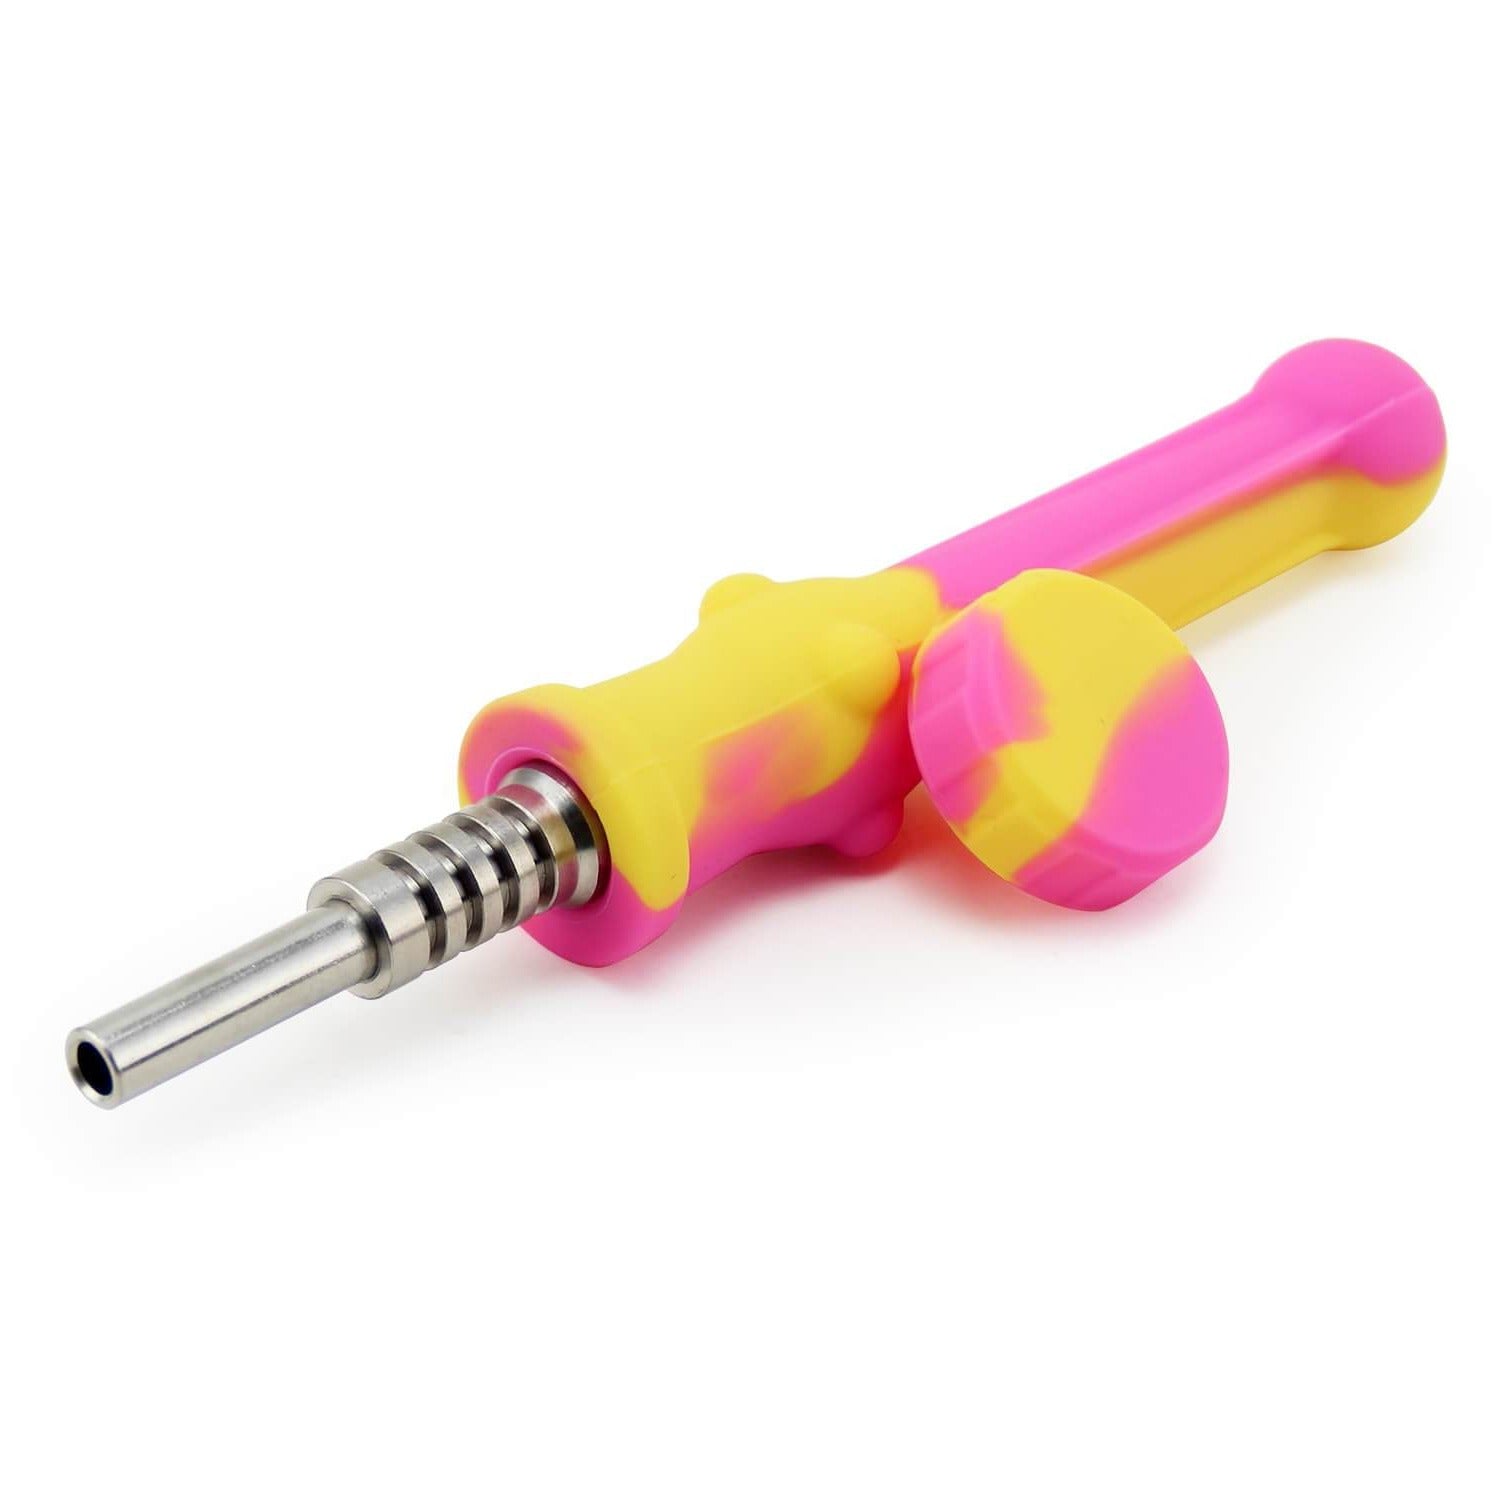 Silicone Nectar Collector Pink/Yellow - INHALCO